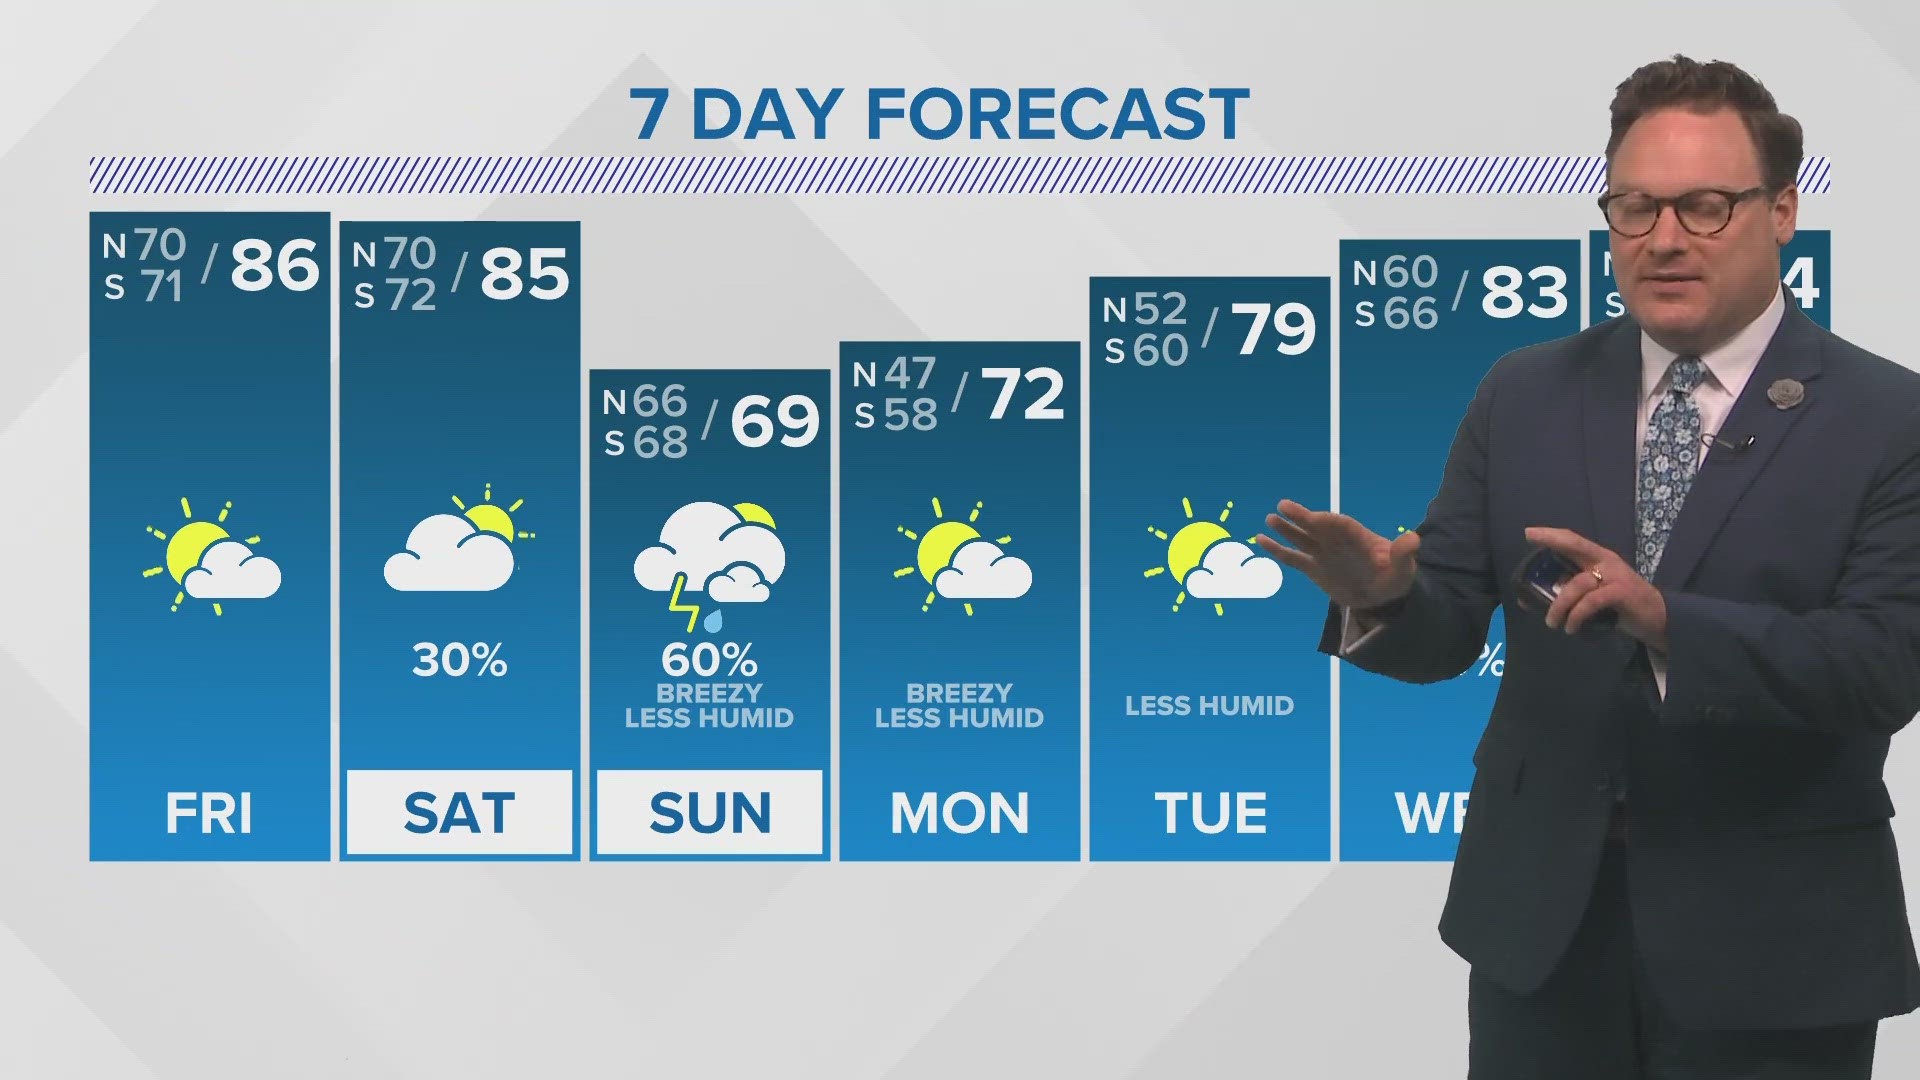 Chief Meteorologist Chris Franklin says we'll see rain and storms chances increase by Sunday with a cold front.